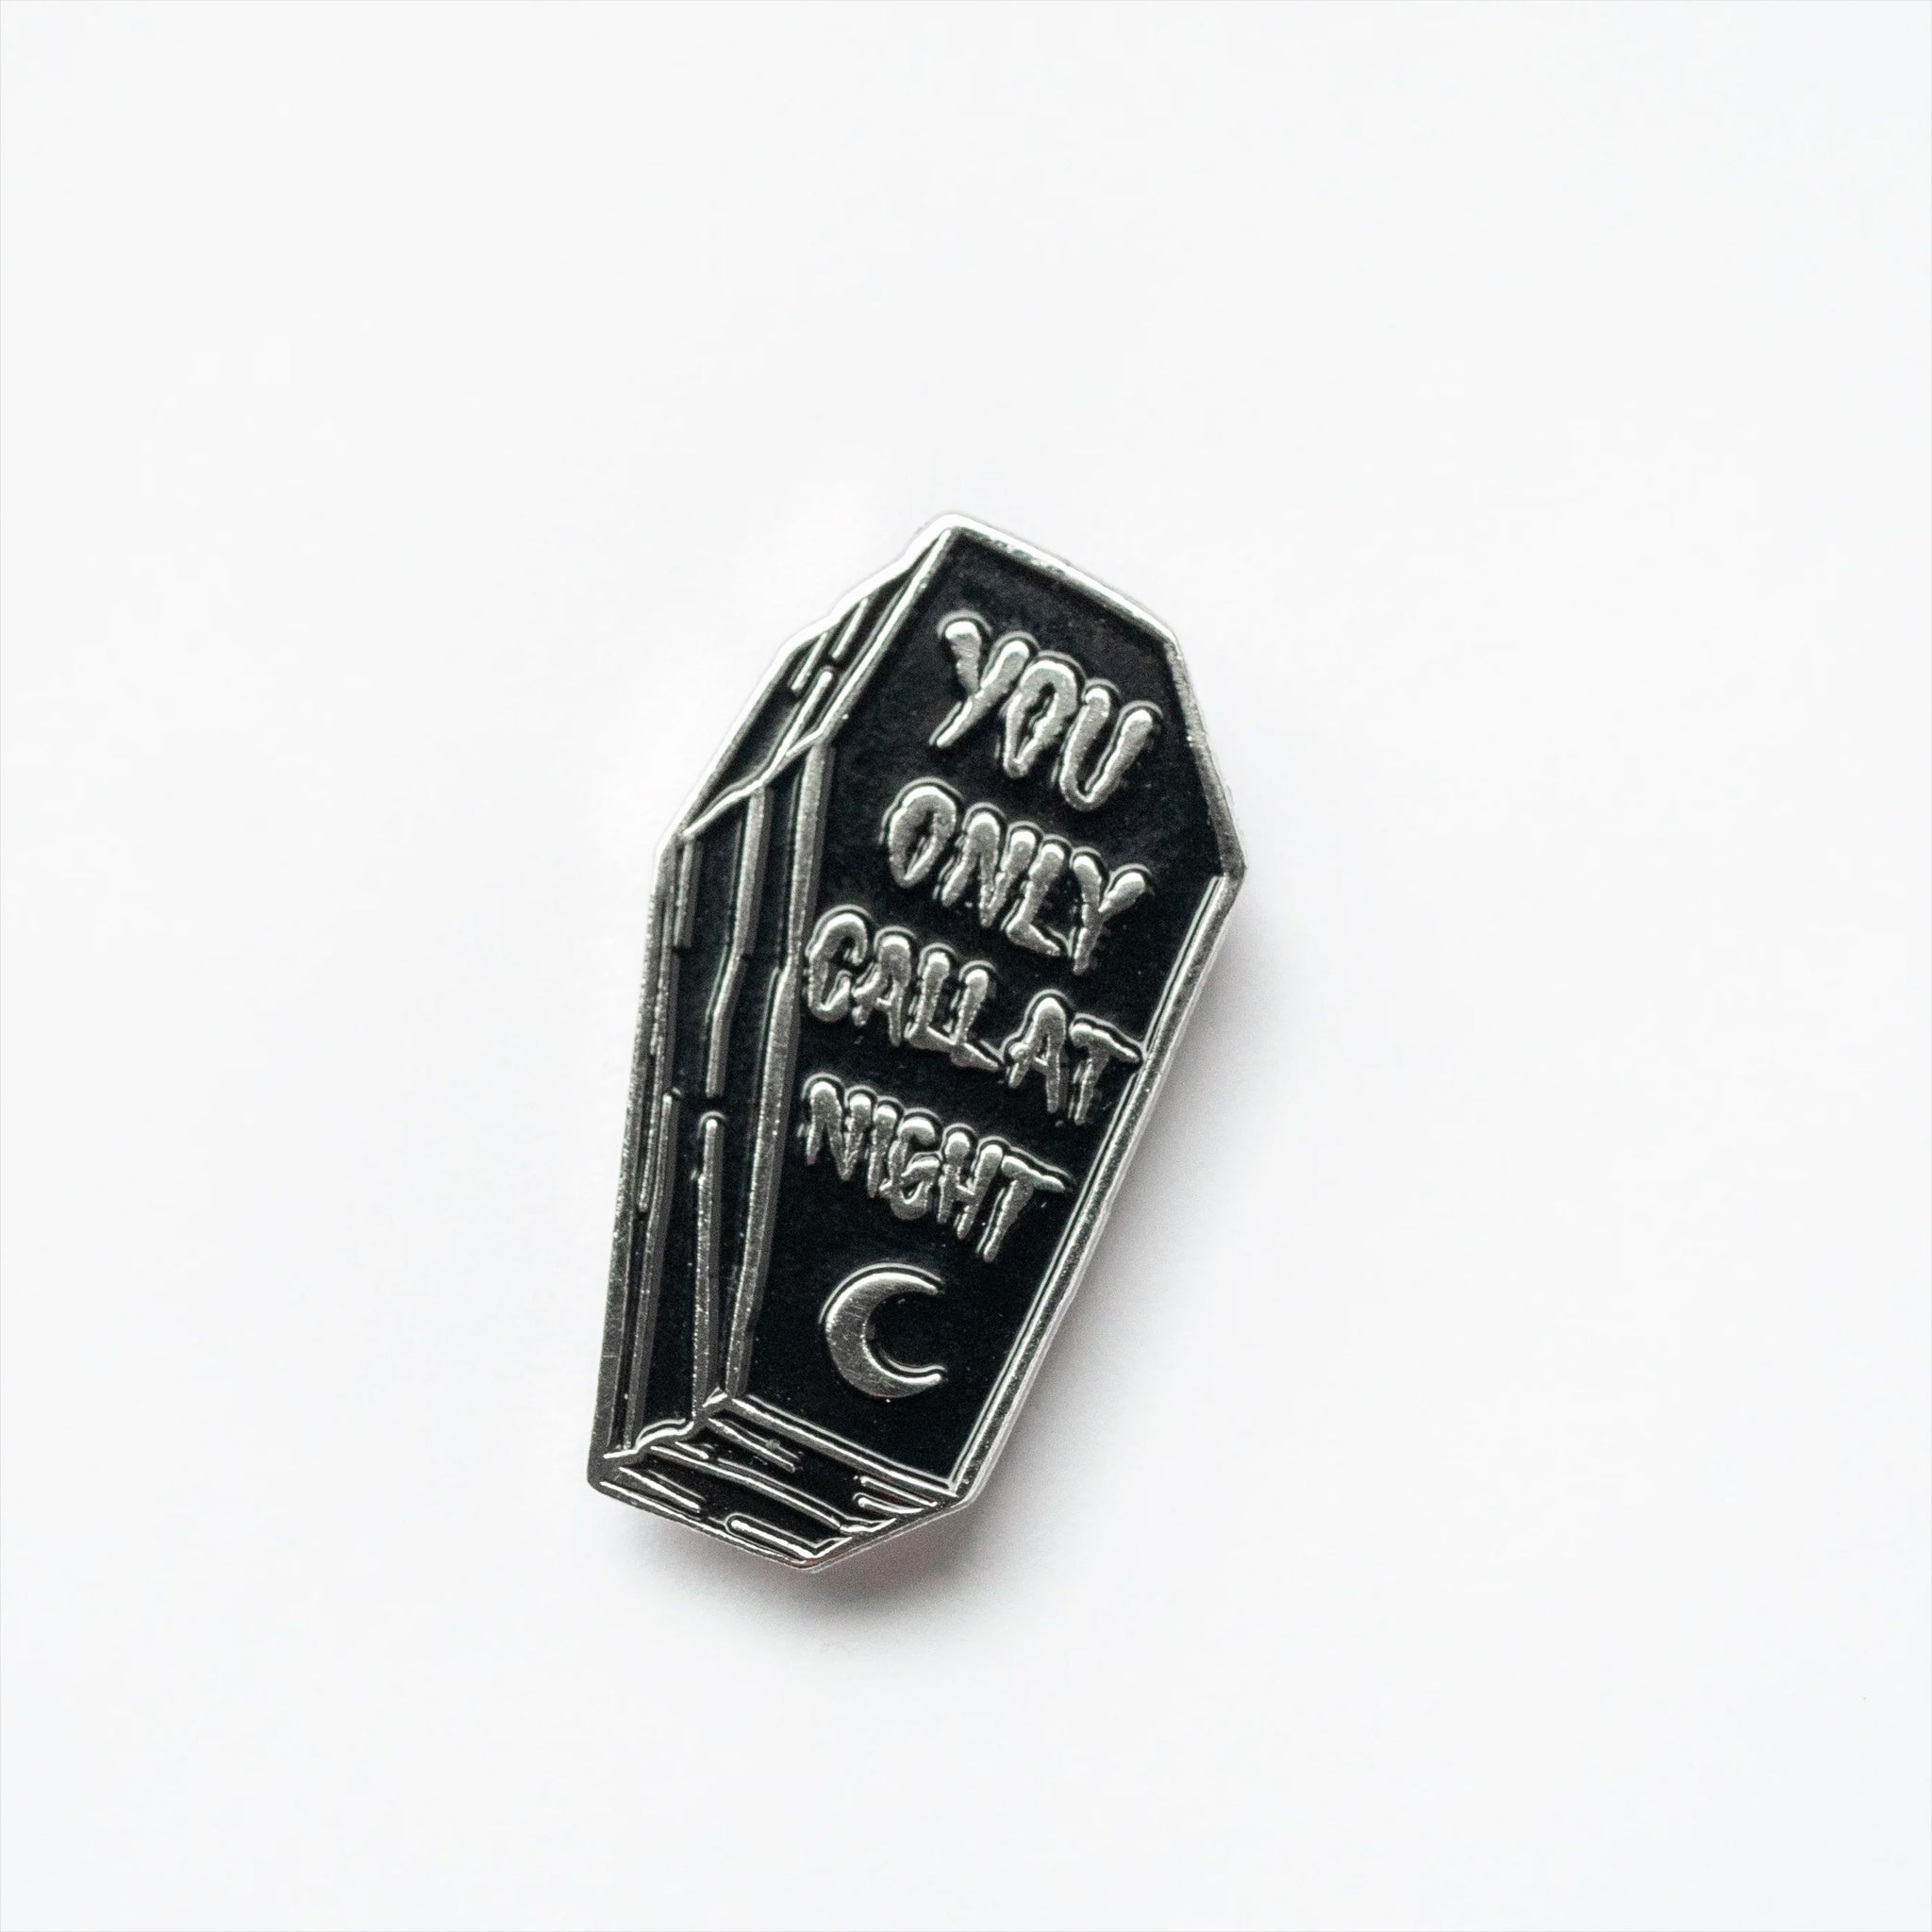 You Only Call At Night Pin